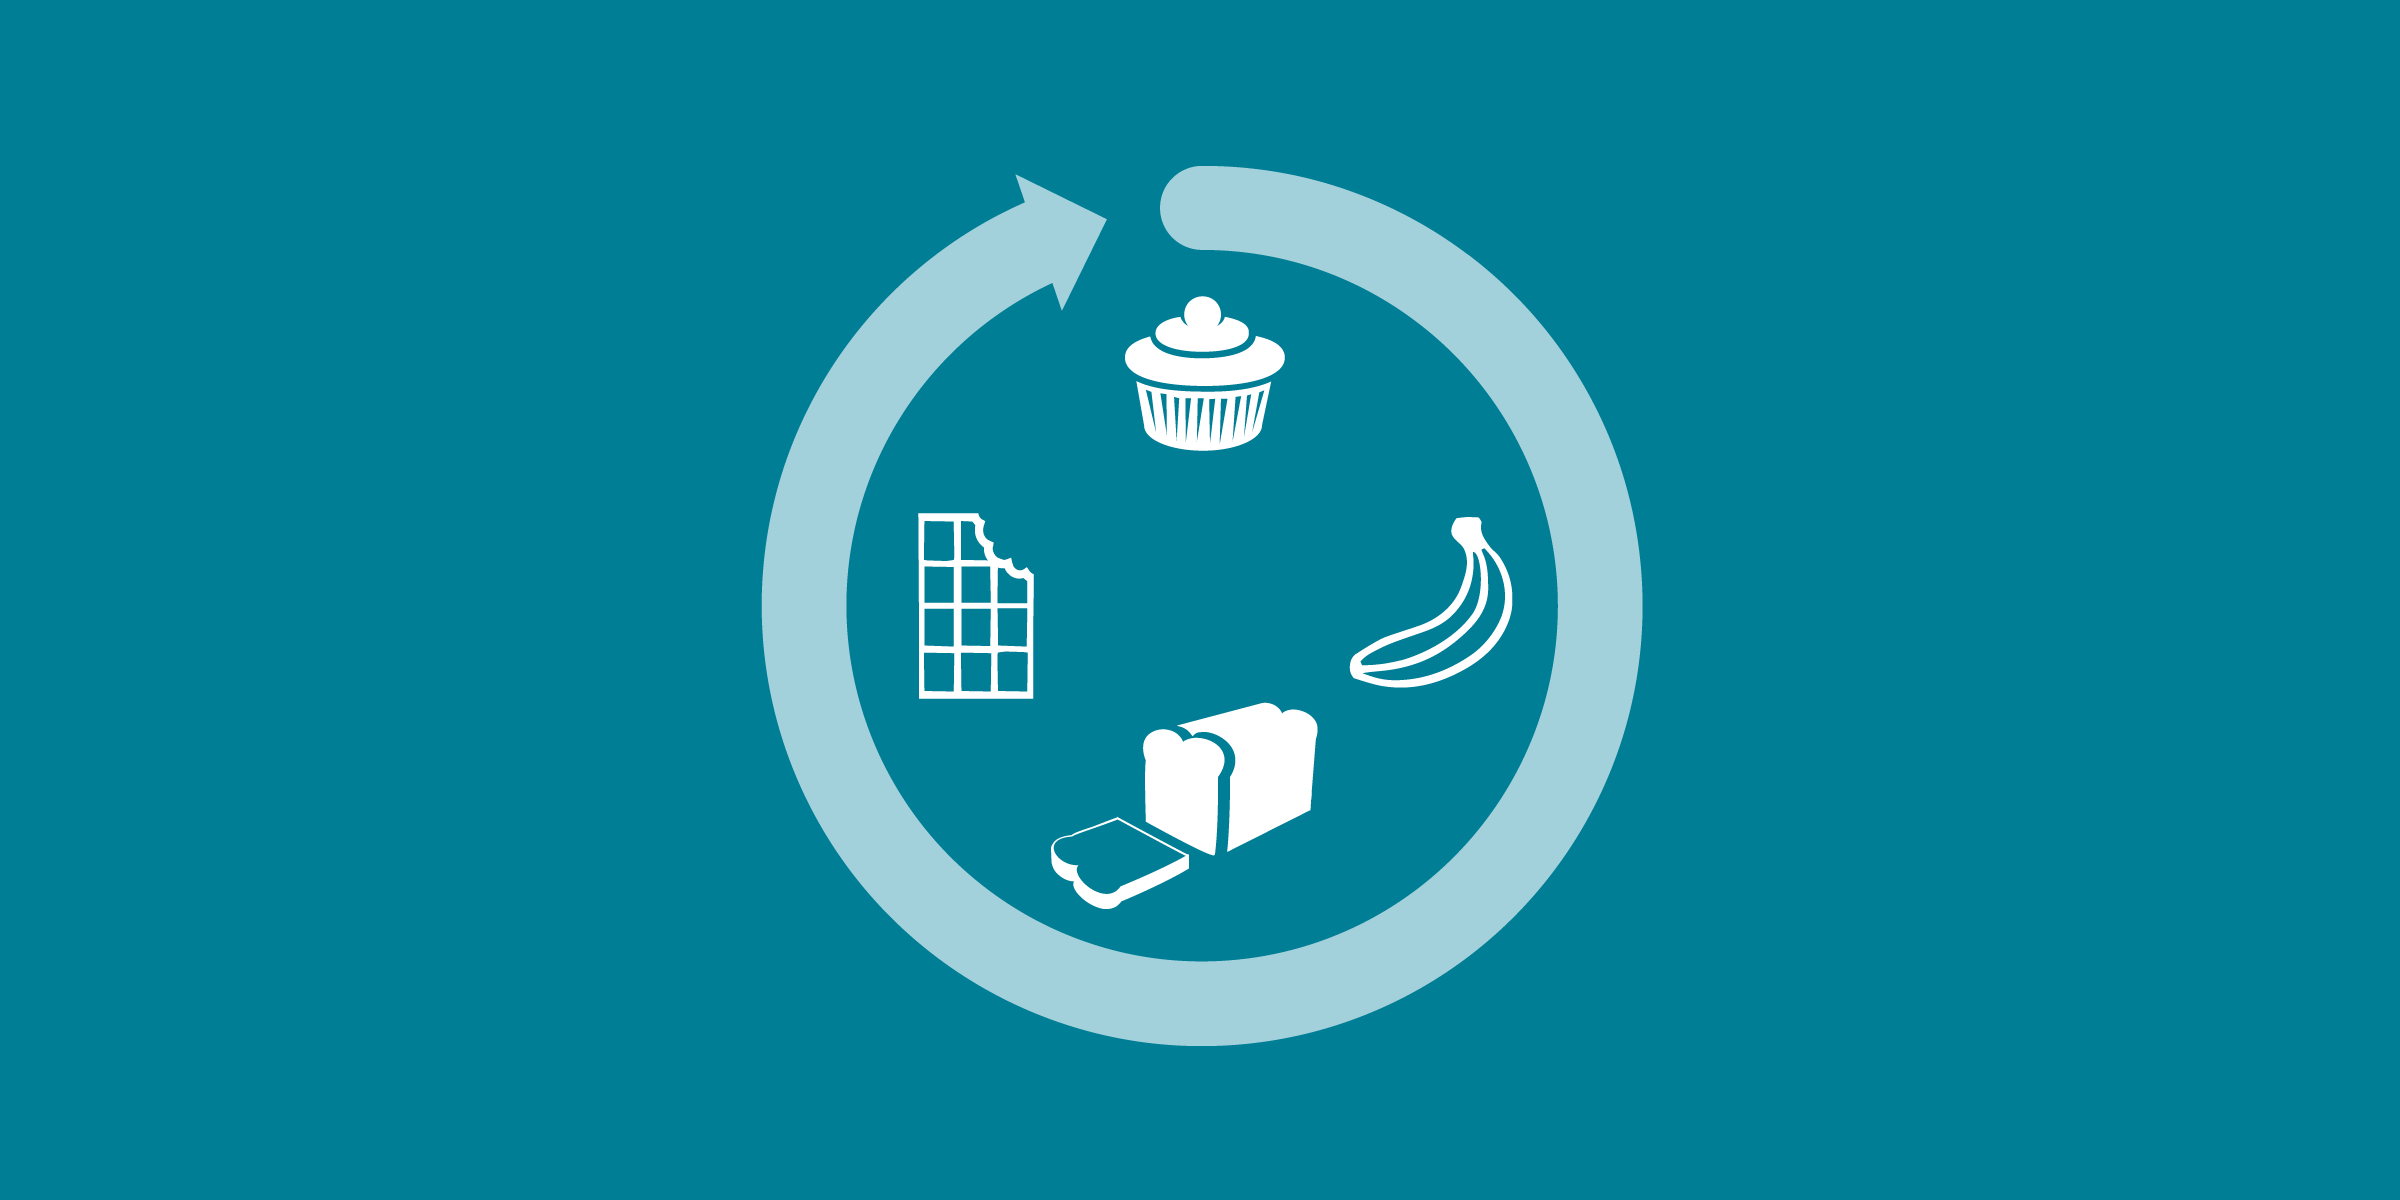 illustration of a light blue circle wrapped around a choclate bar, a banana, a loaf of bread and a muffin, some clue nutrition icons